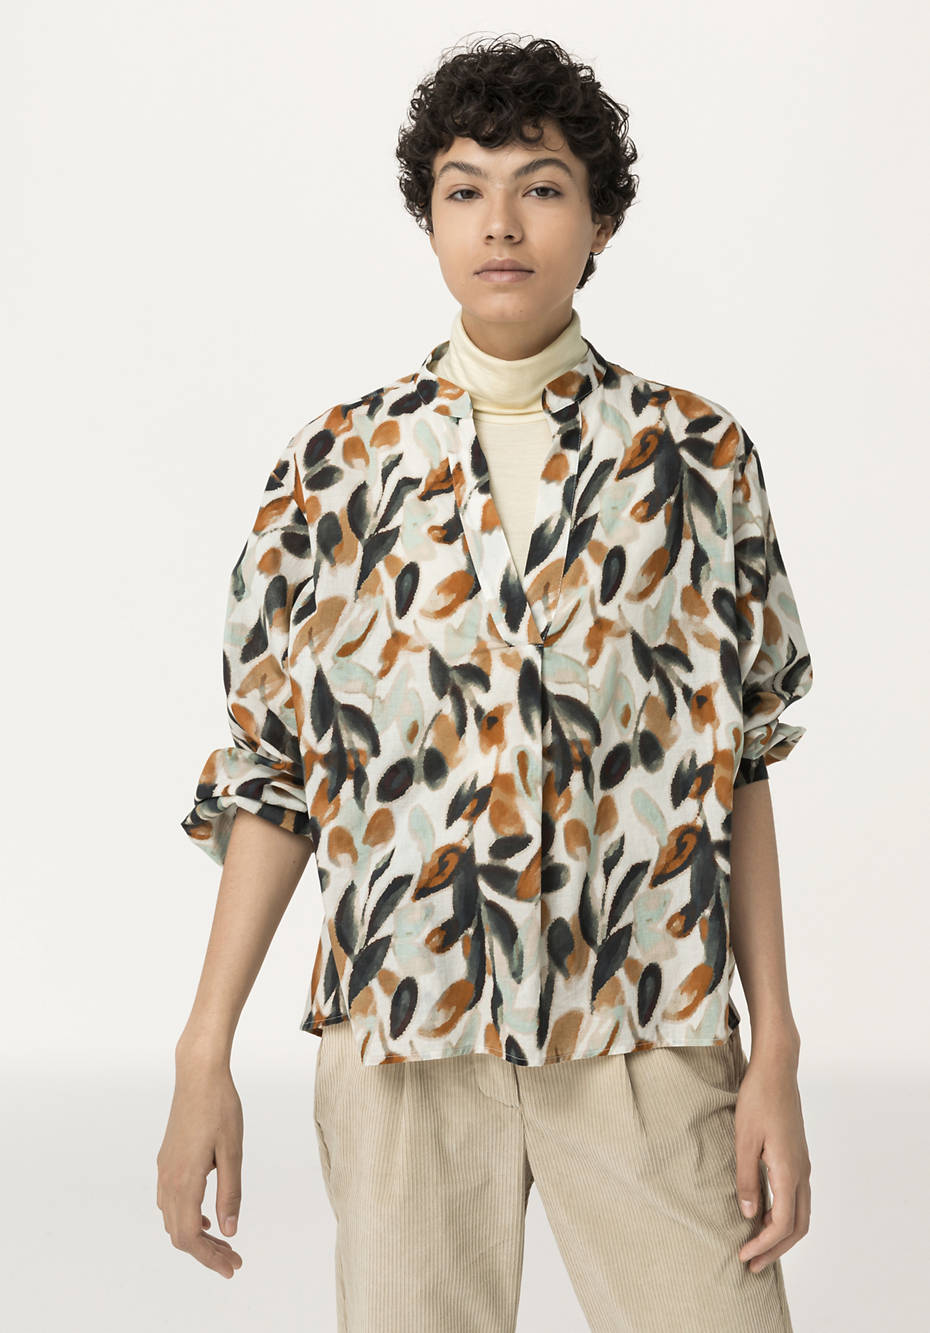 Blouse made from pure organic cotton